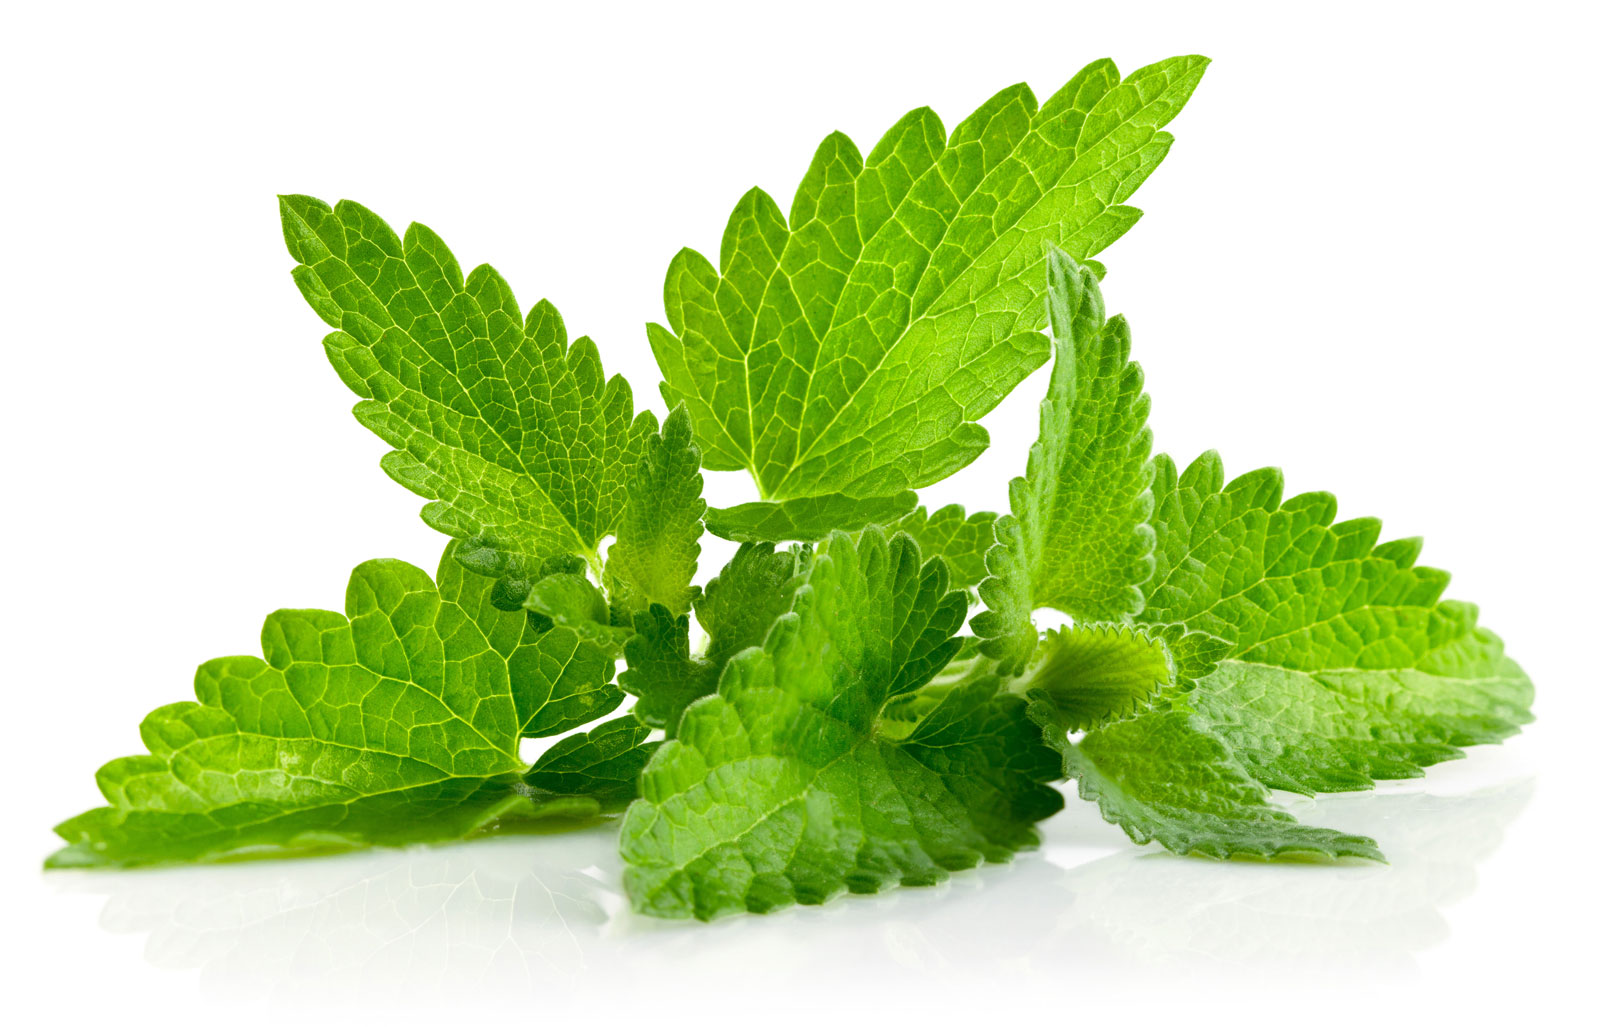 Mint Leaves - One Of The Oldest Seasoning And Flavoring Agent